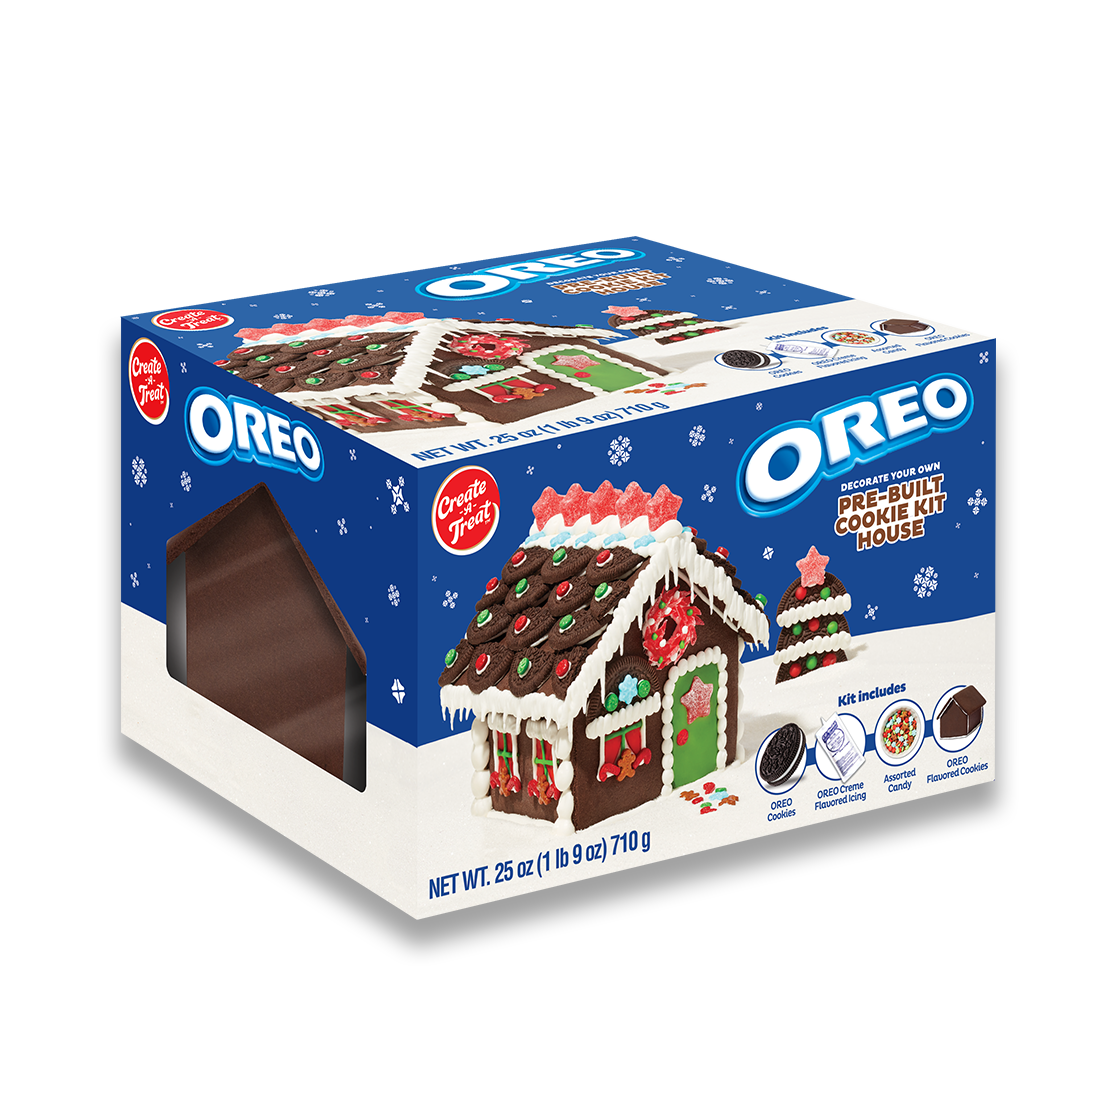 Create A Treat Oreo Decorate Your Own Pre-built Cookie Kit House x 25 oz.